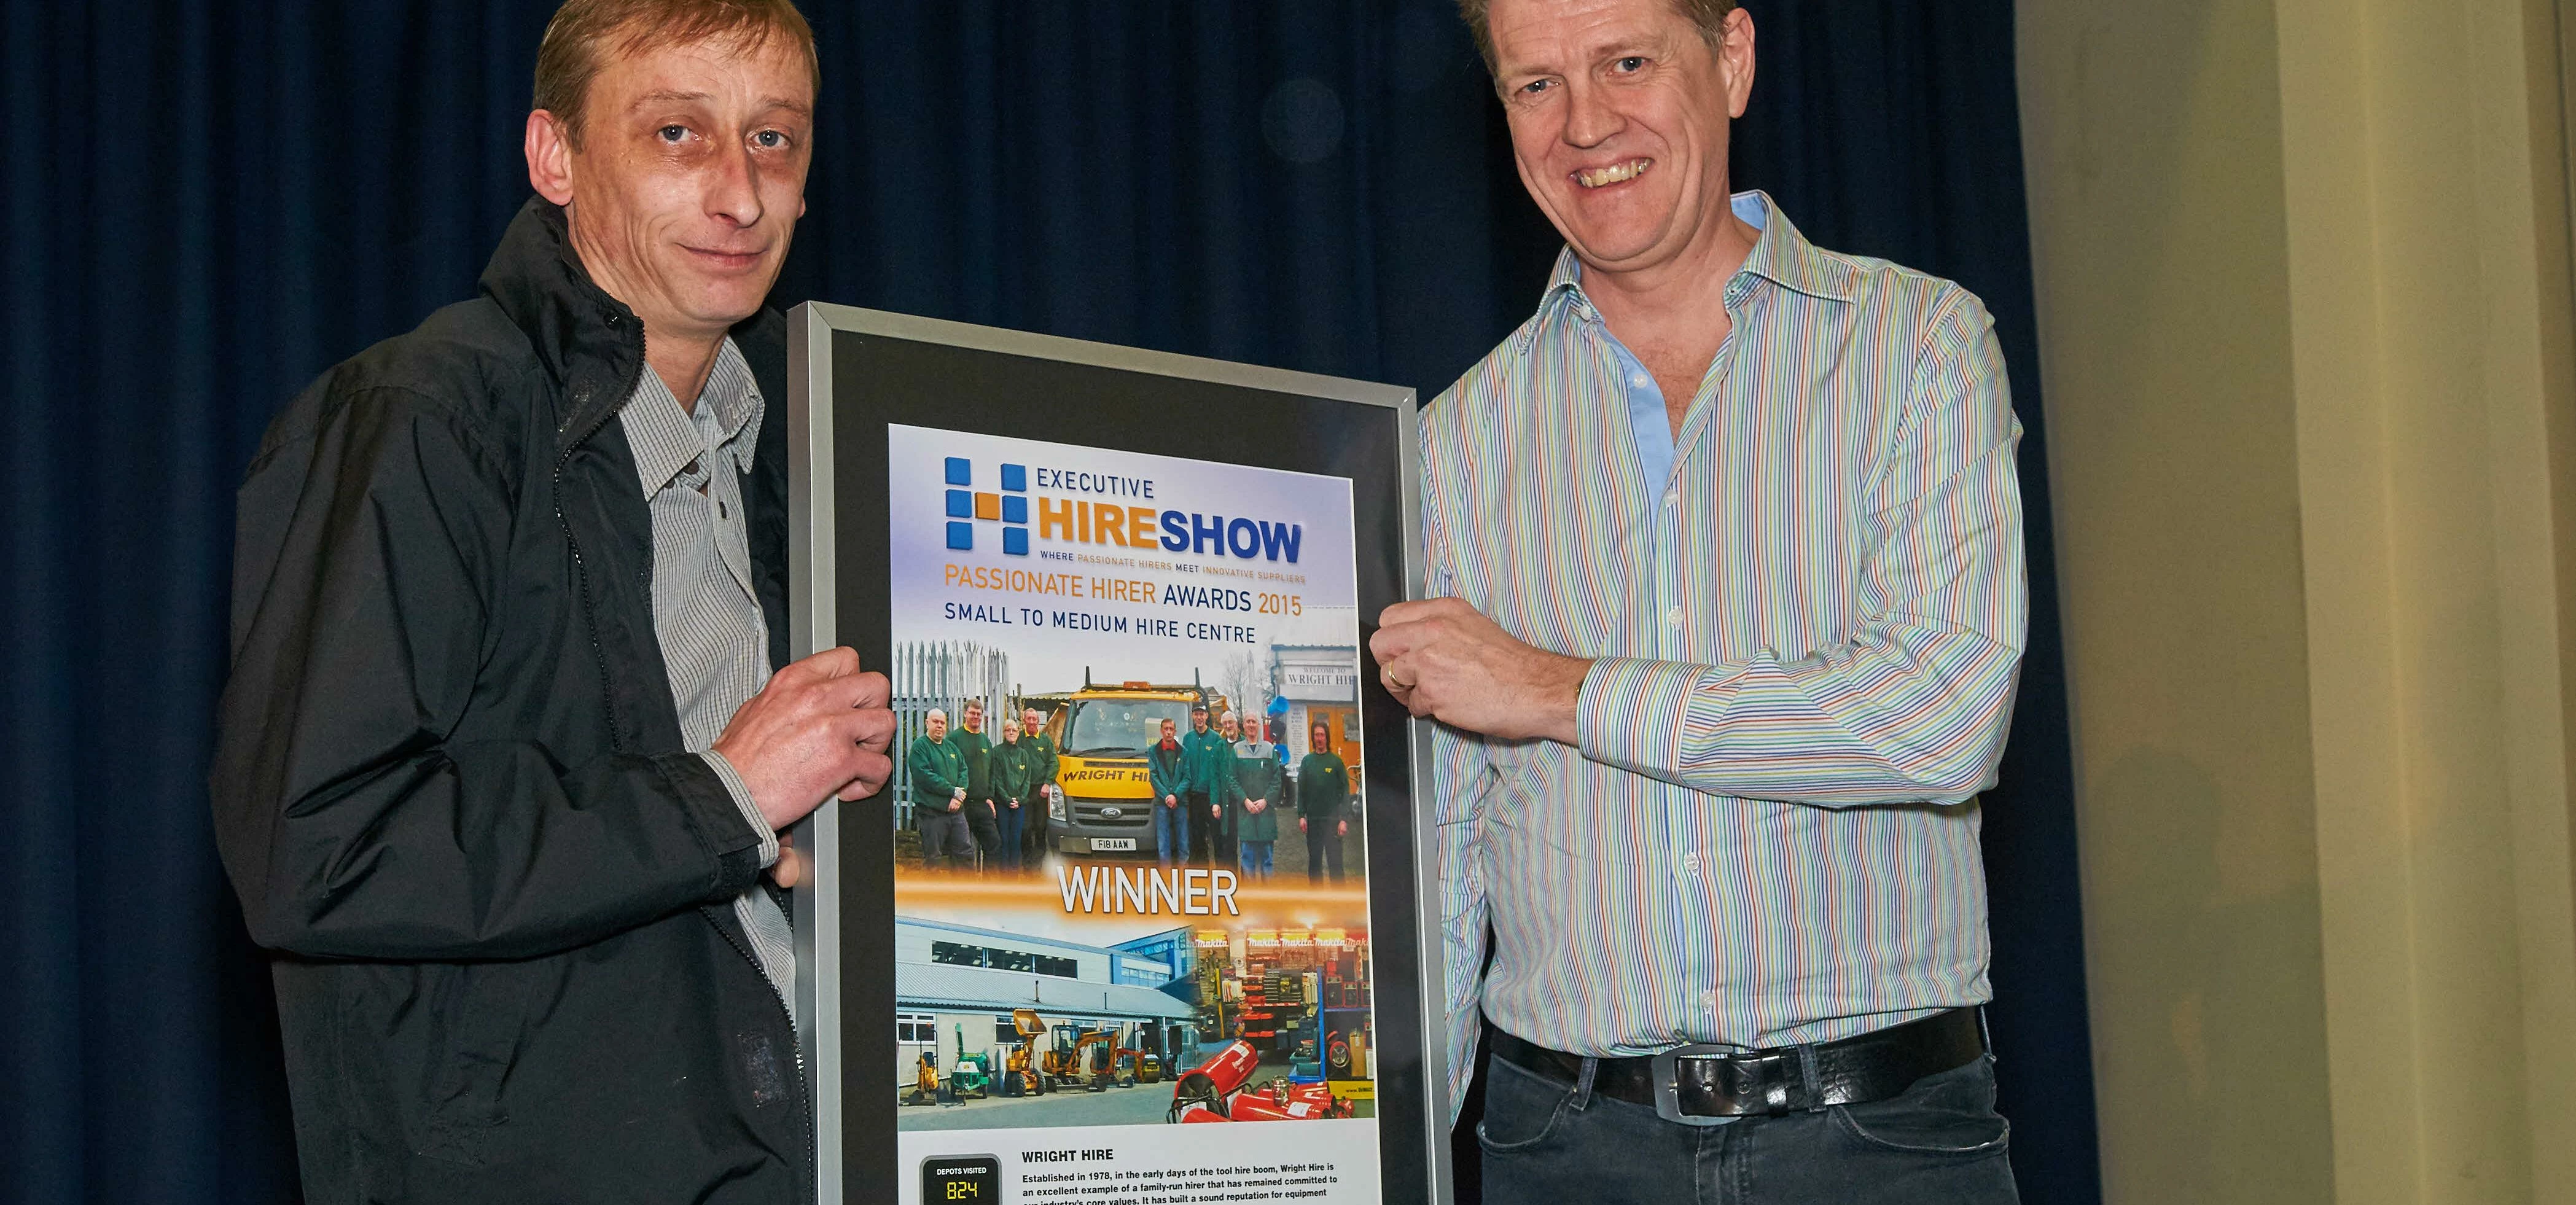 Marple-based Wright Hire picks up Passionate Hirer of the Year Award 2015